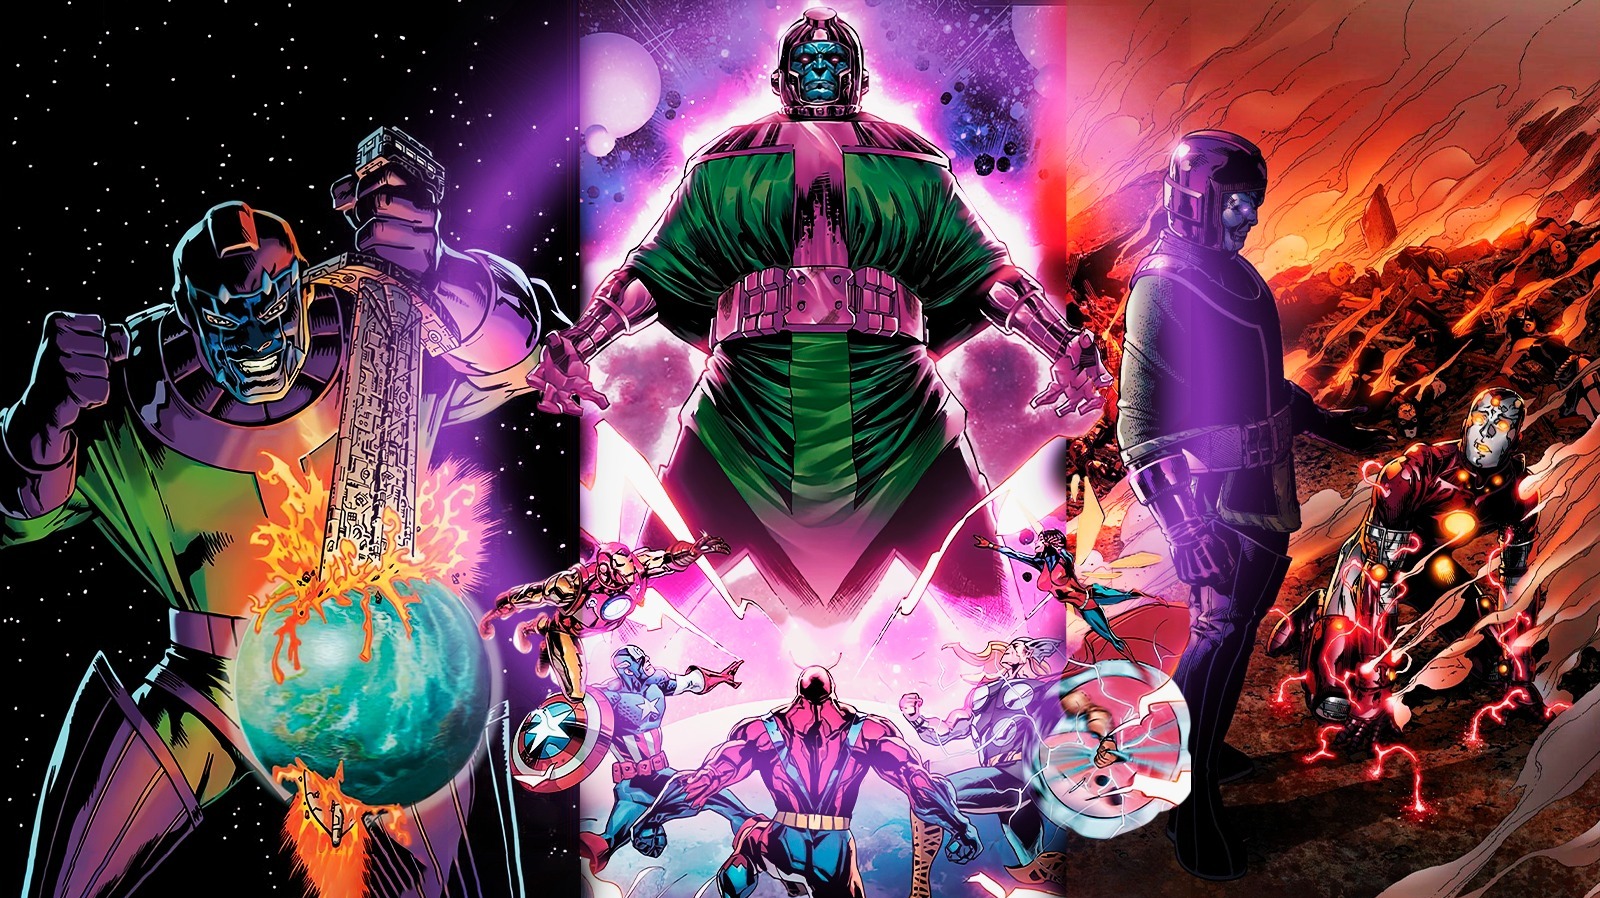 The 10 Best Kang the Conqueror Comics Ever